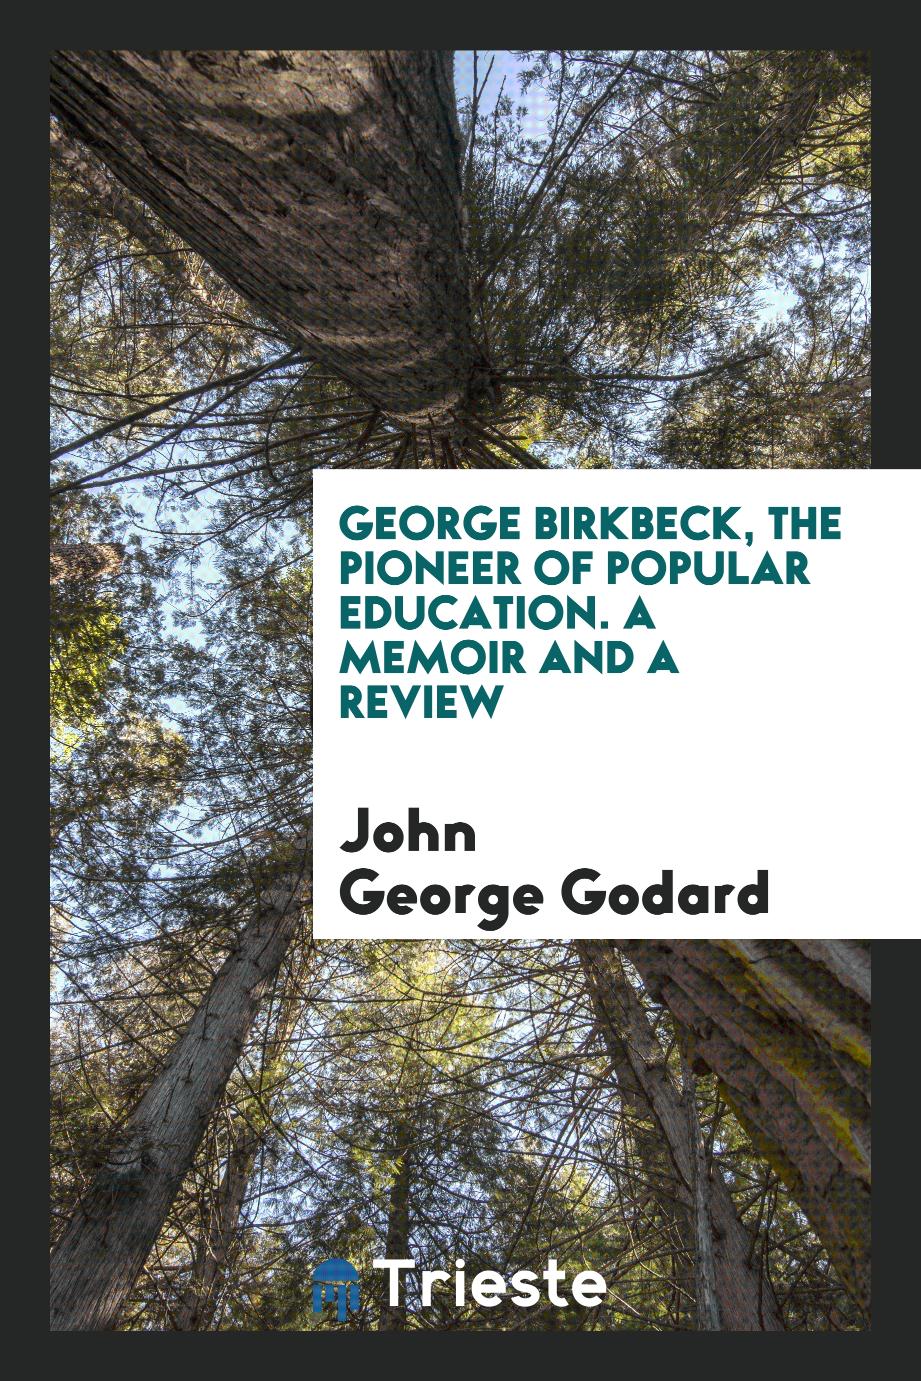 George Birkbeck, the pioneer of popular education. A memoir and a review